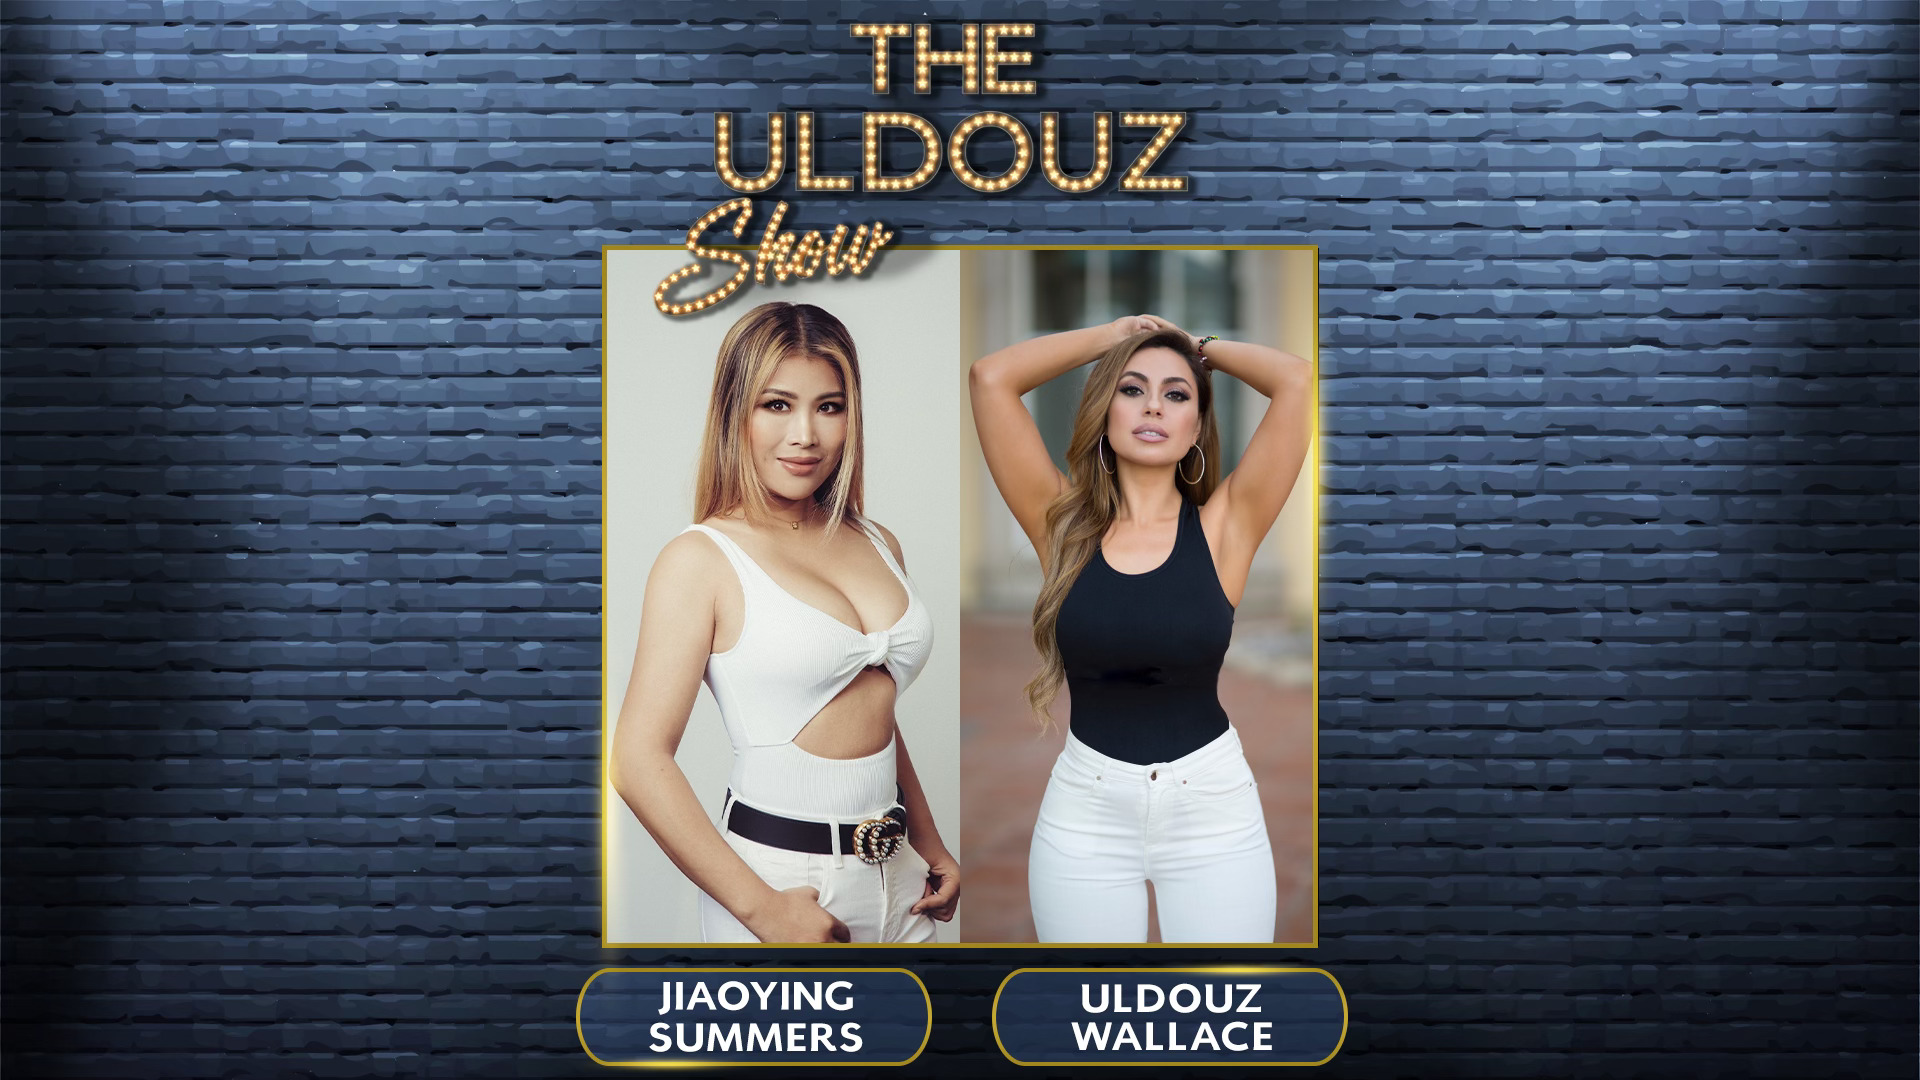 The Uldouz Show with Guest Jiaoying Summers, Stand Up Comedian, Comedy Club Owner & Tik Tok Star